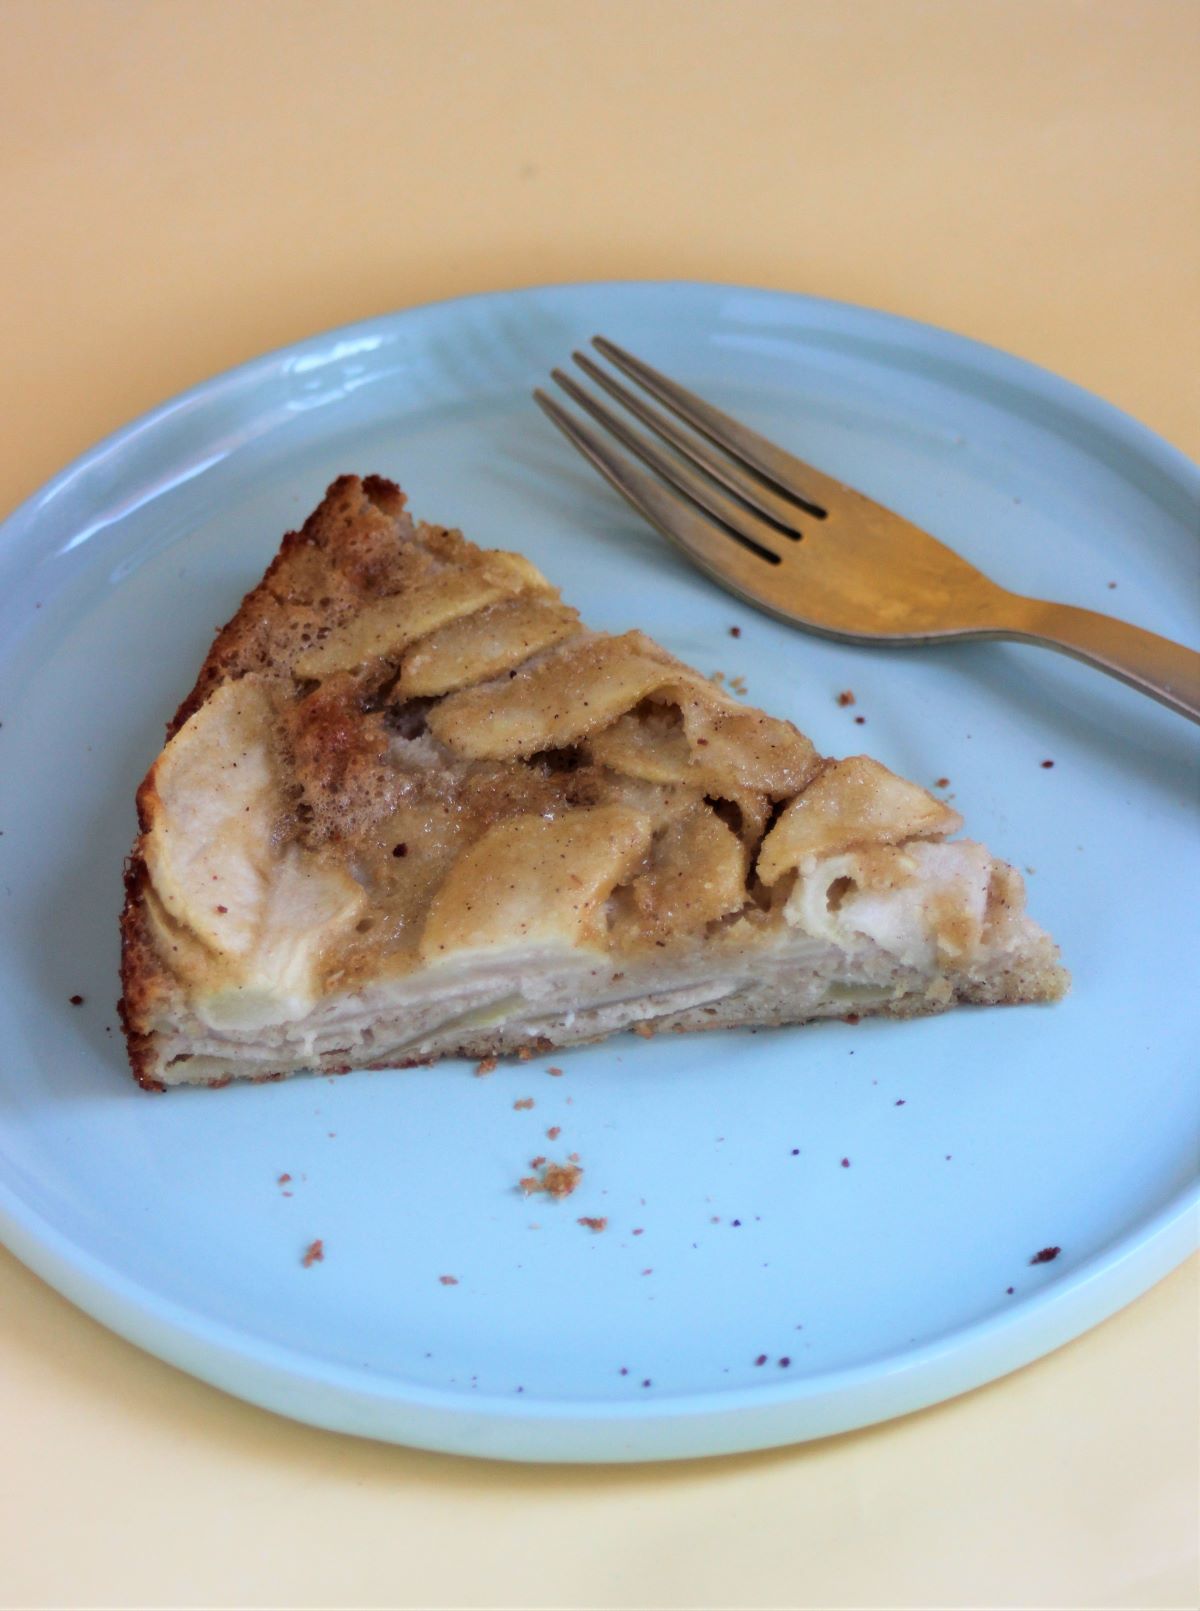 A portion of apple cake on a light blue plate and a golden fork.